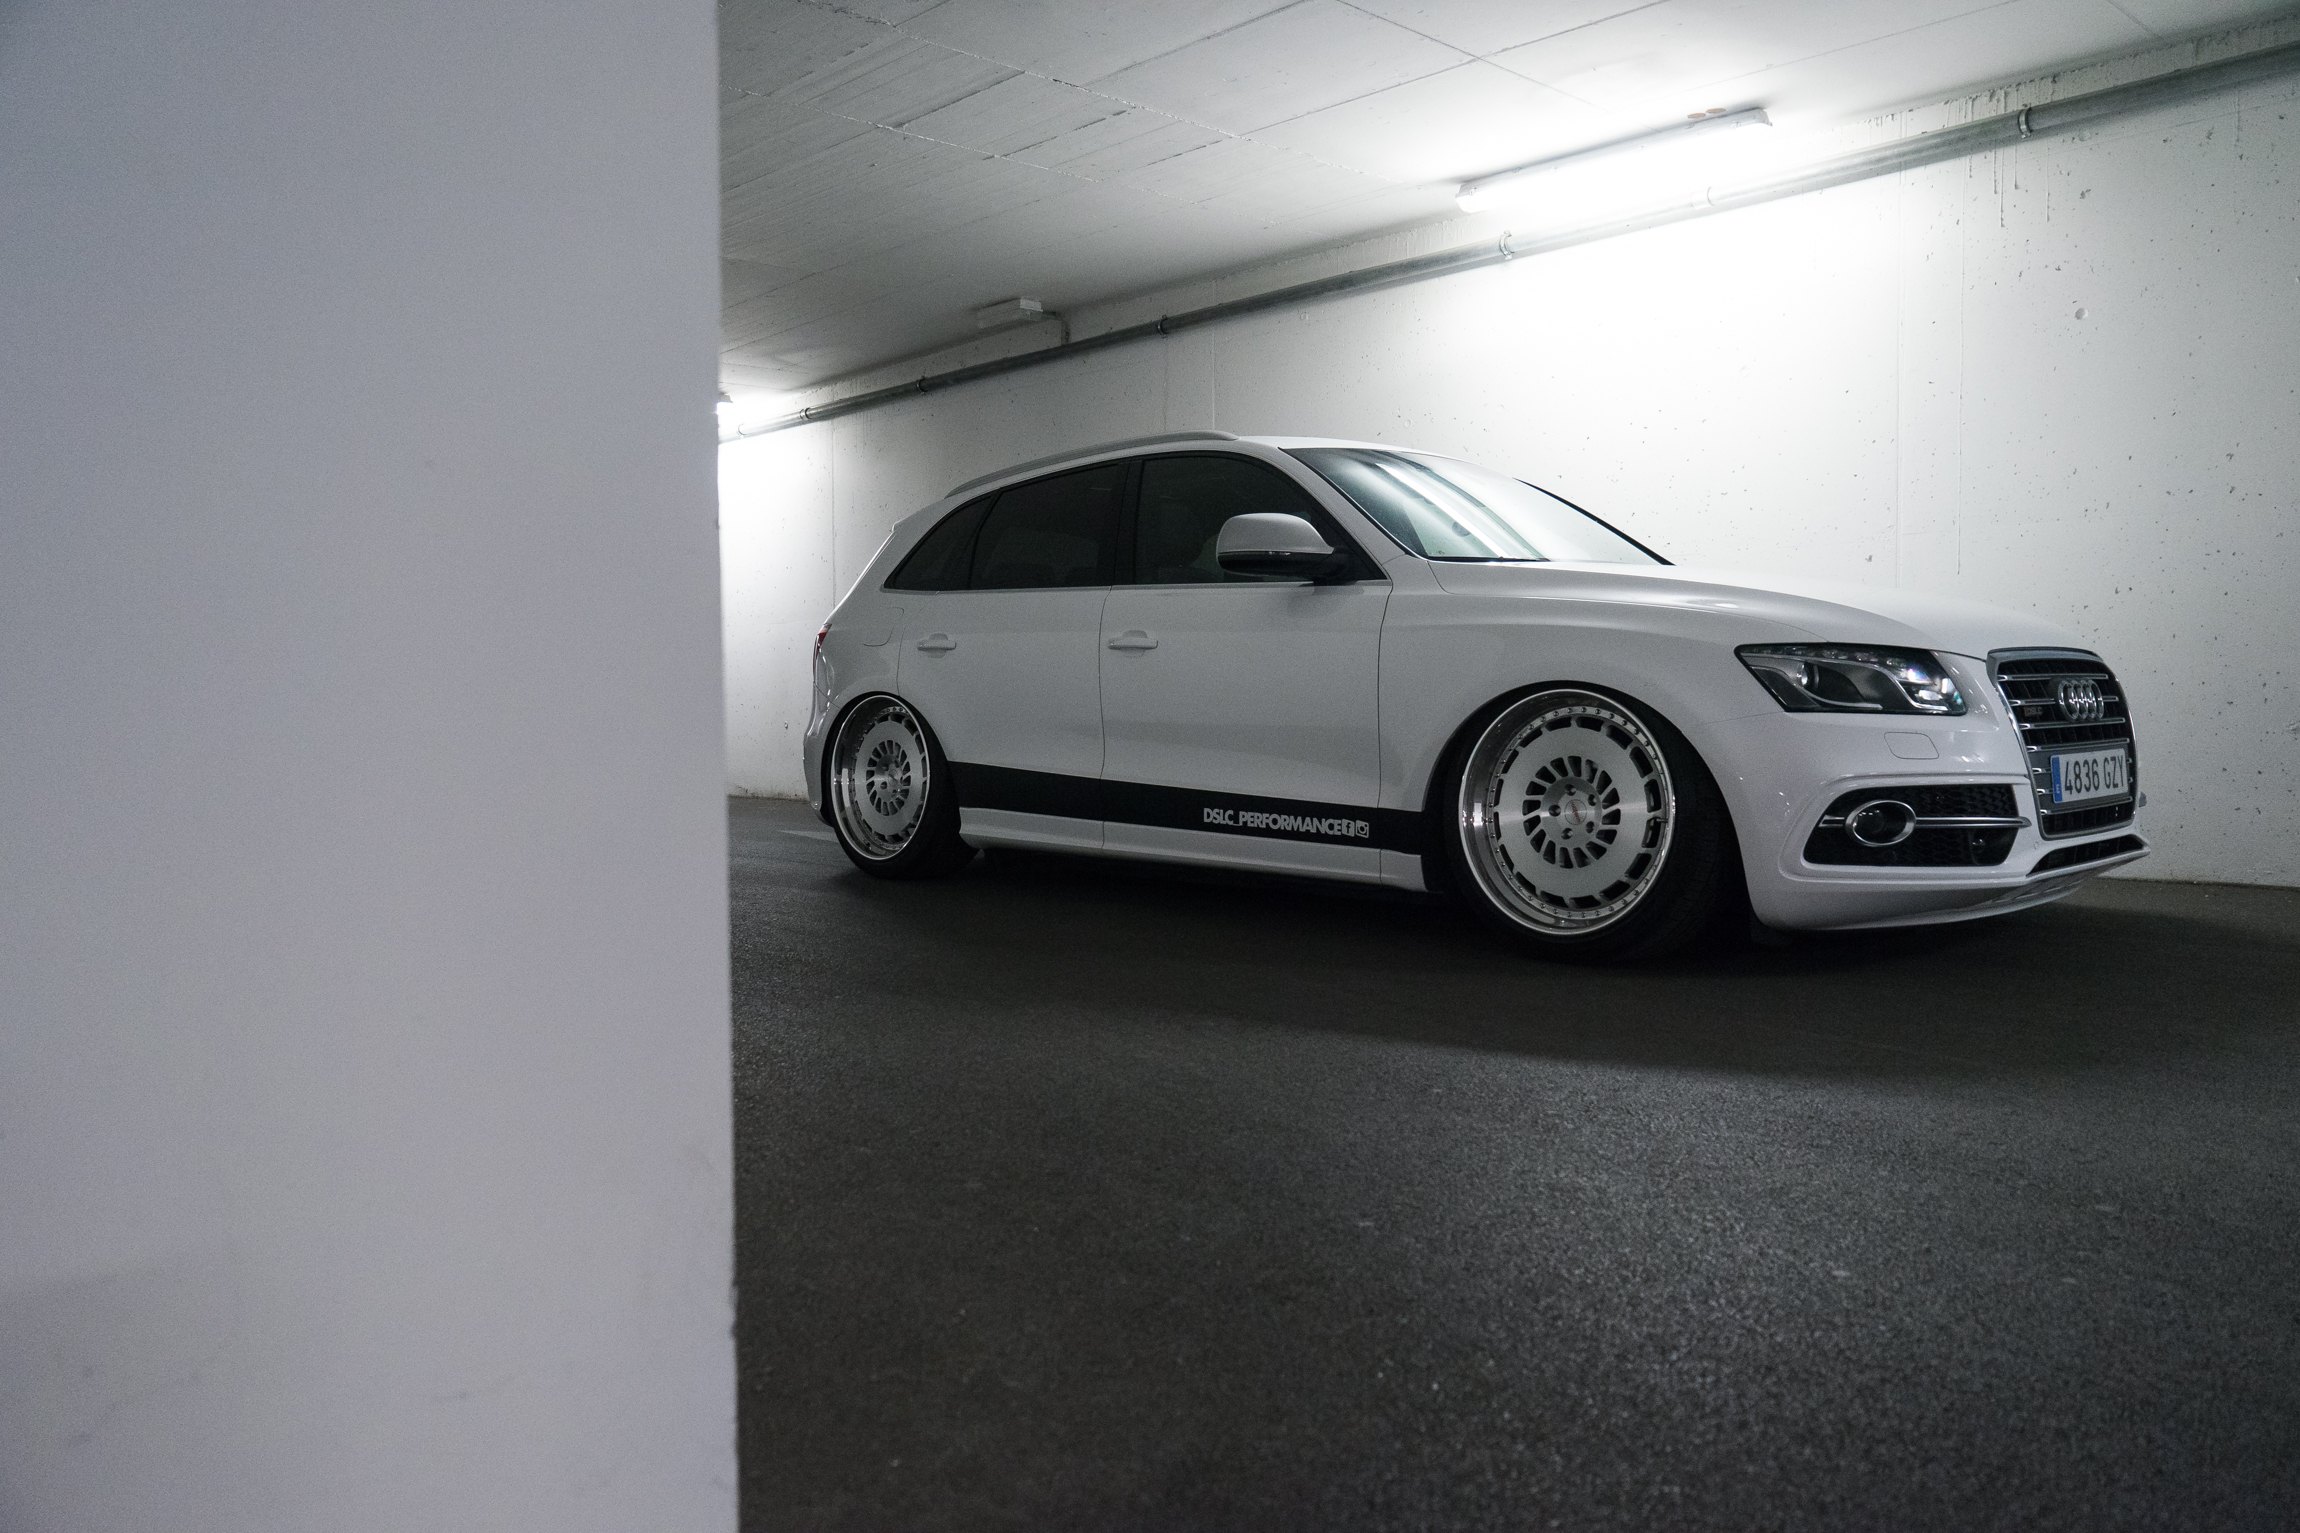 Aftermarket Headlights on White Audi Q5 - Photo by Rotiform